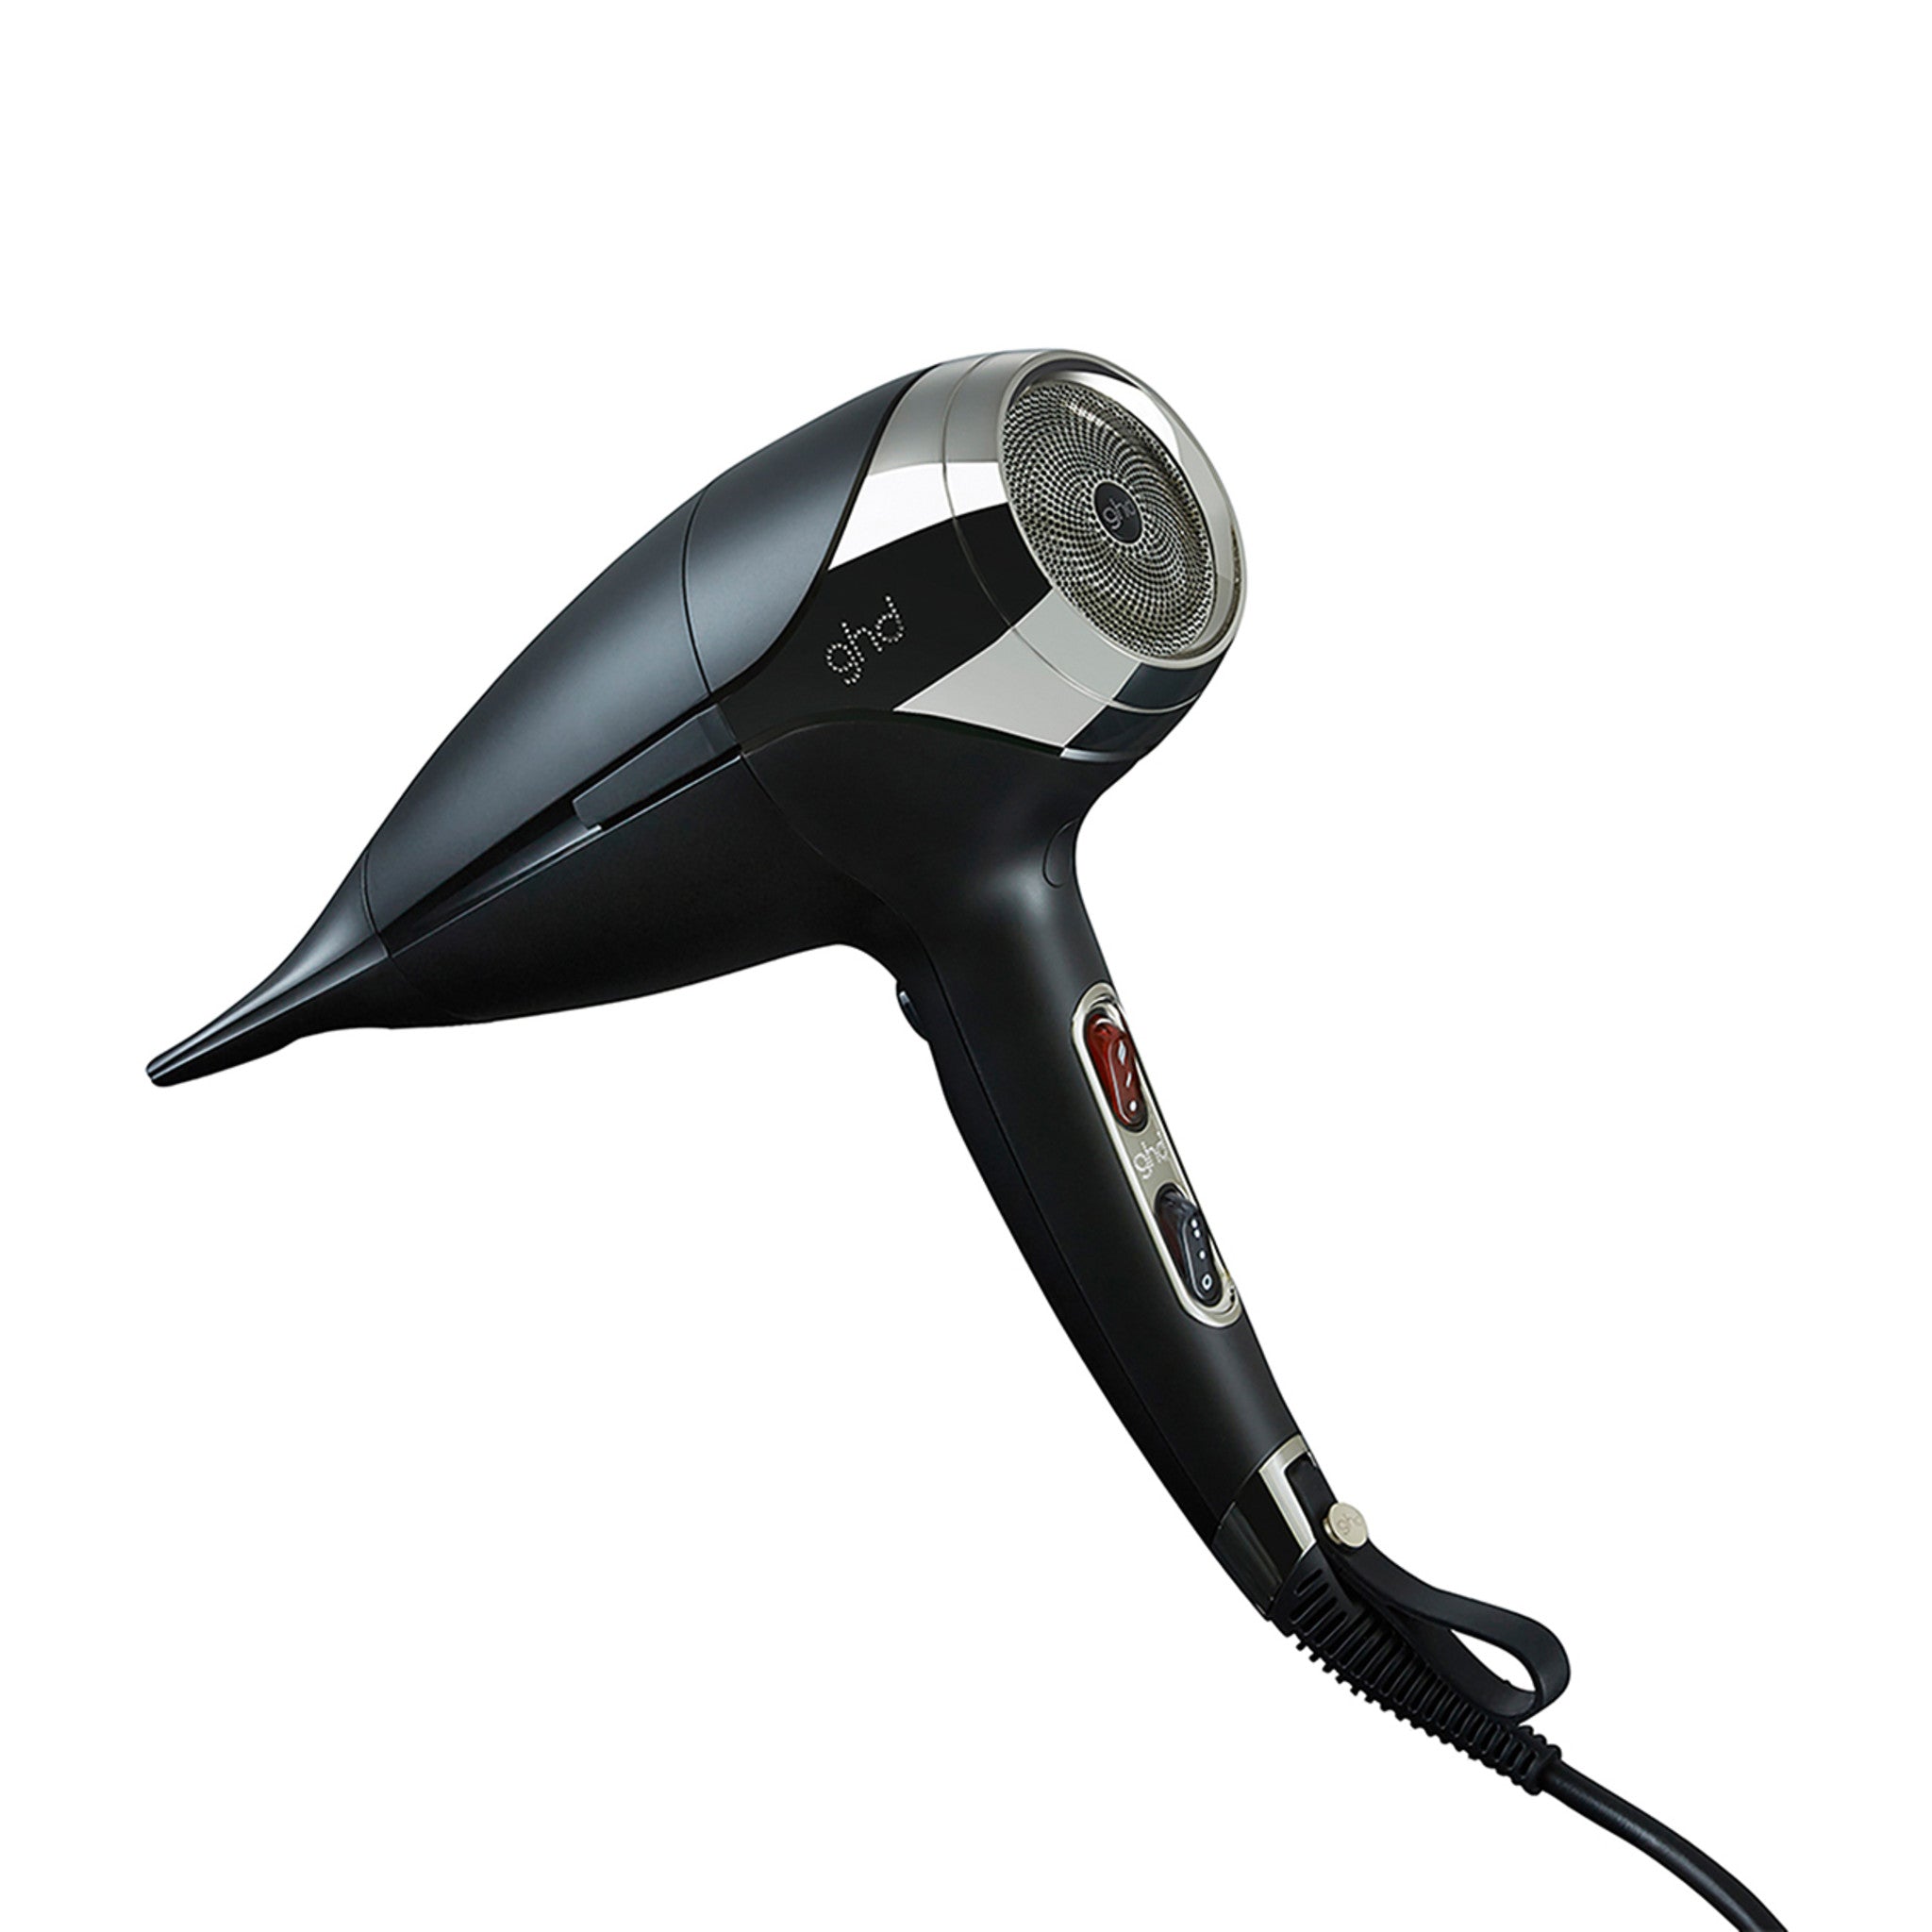 Photos - Other sanitary accessories GHD Helios 1875W Advanced Professional Hair Dryer, Black 